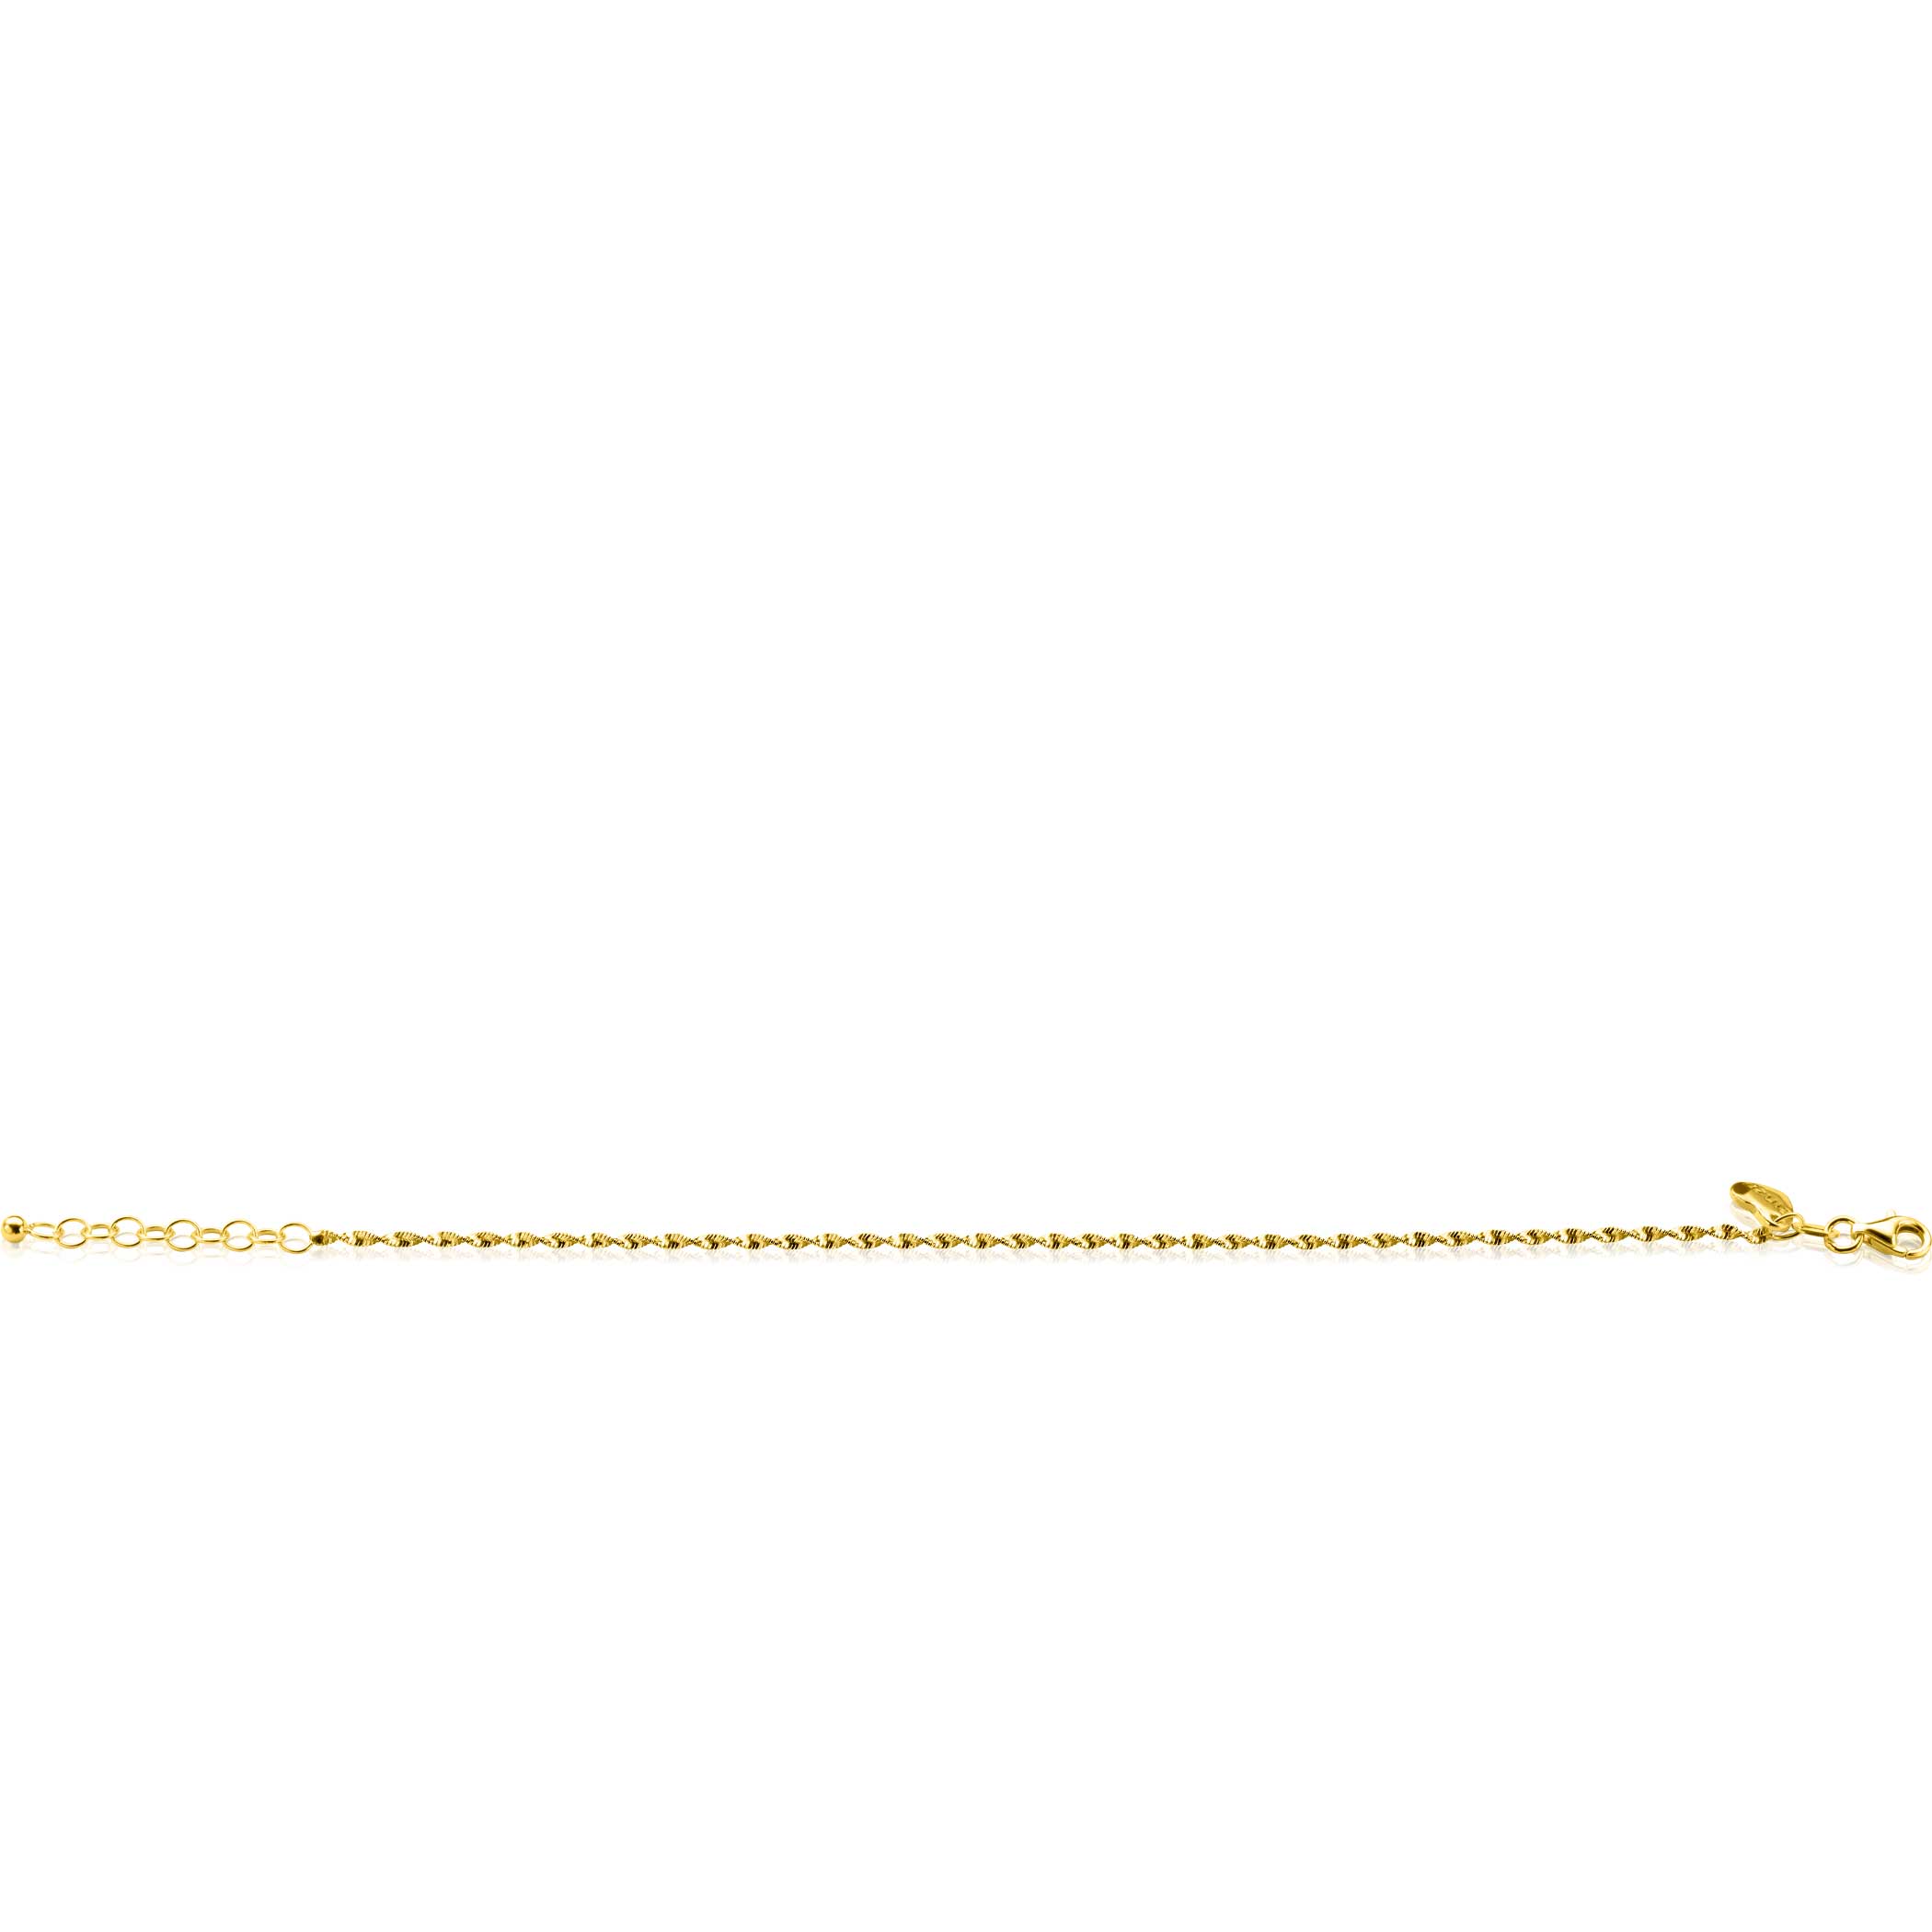 ZINZI gold plated silver singapore bracelet with sparkling twisted links 1.9mm wide 17-20cm ZIA2585G
